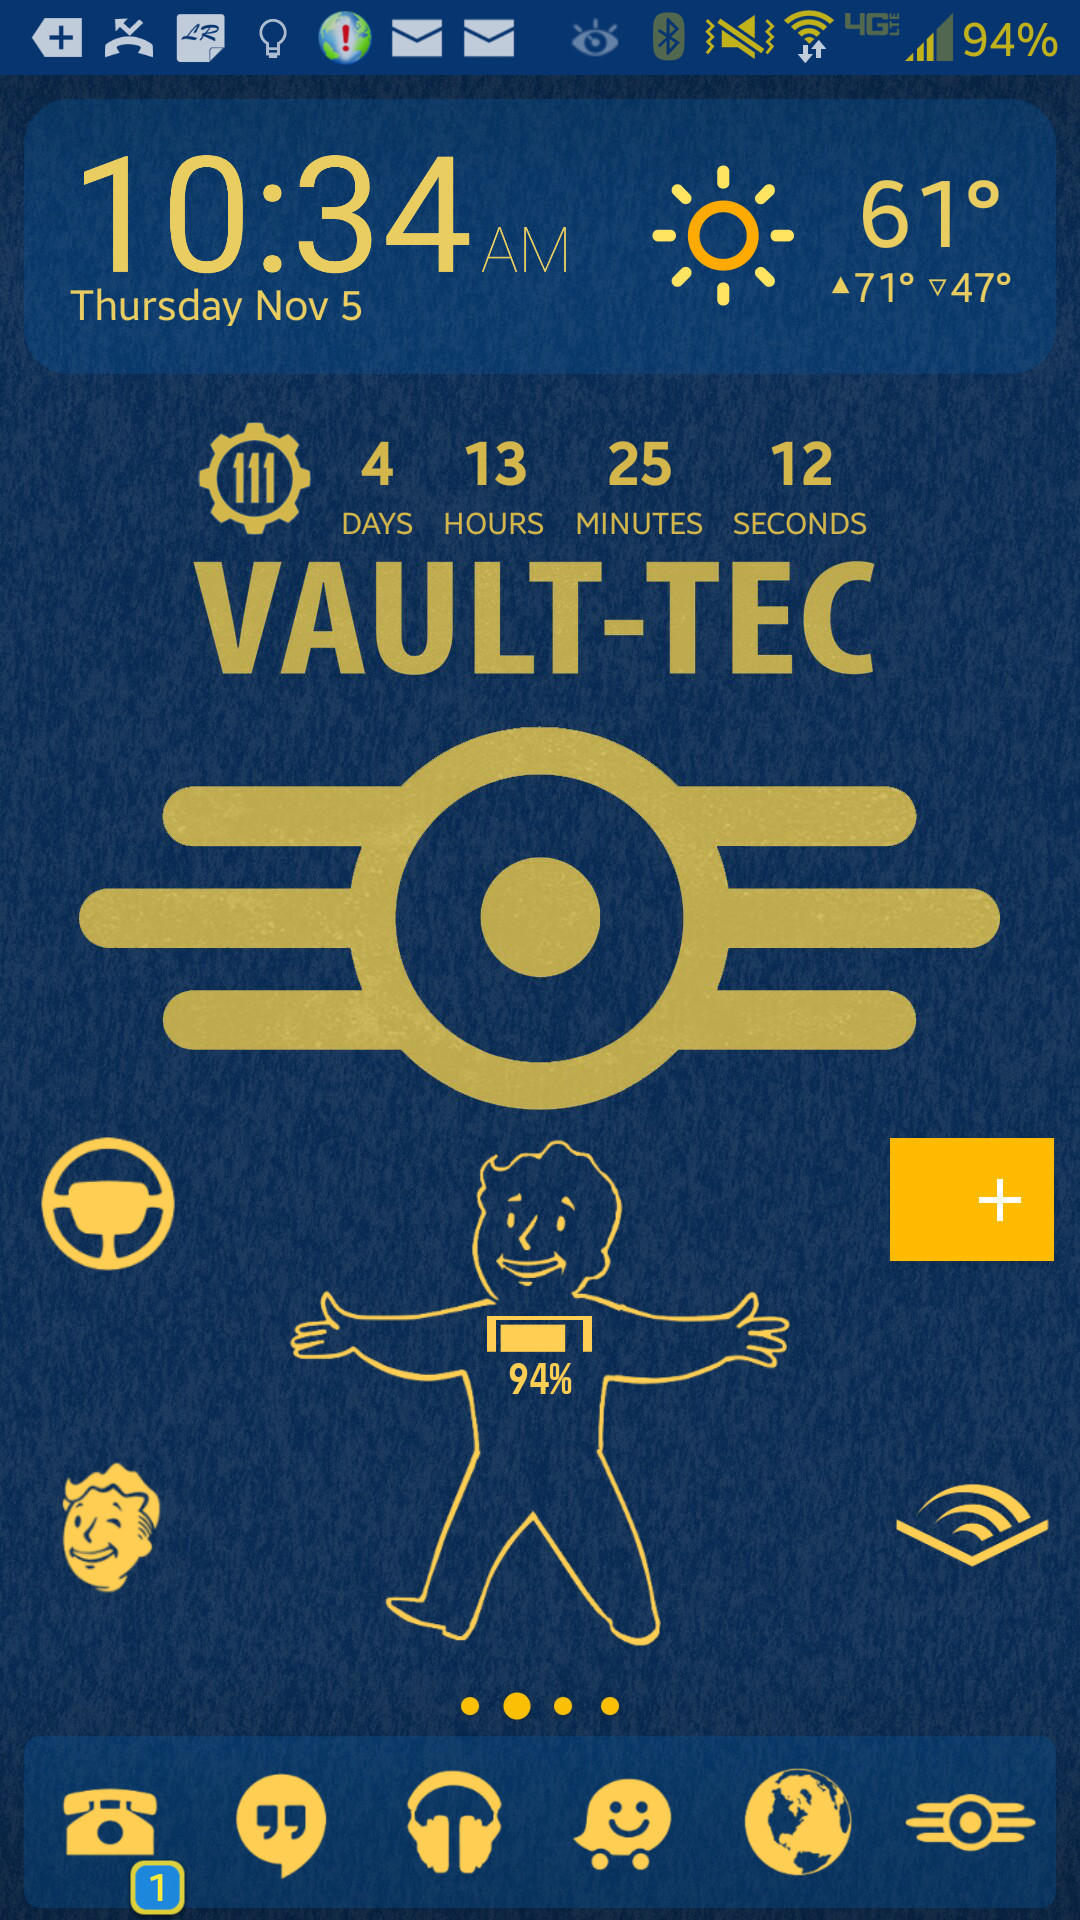 1080x1920 Themed my phone while waiting for Fallout 4. Found the Vault-Tec logo and I  slapped a simple wallpaper together for my Note 3  For the  curious: ...